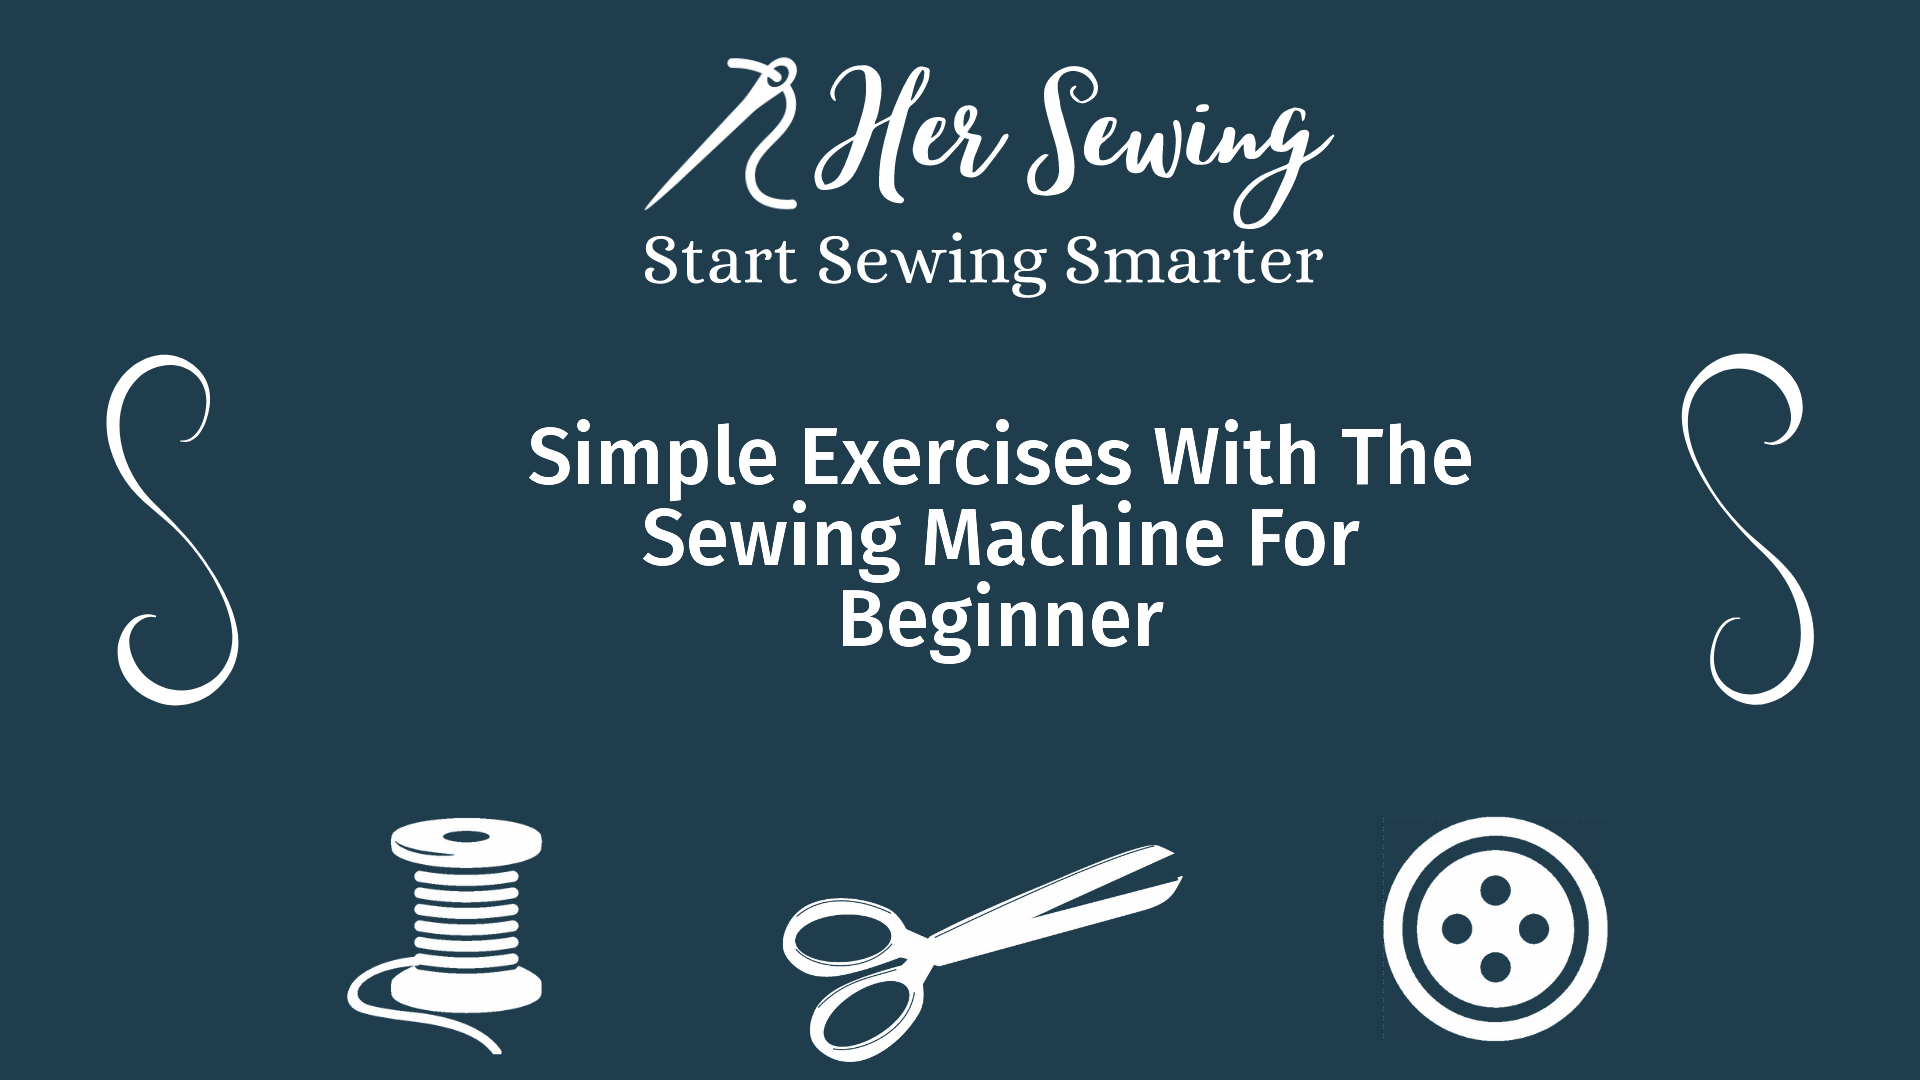 Simple Exercises With The Sewing Machine For Beginner